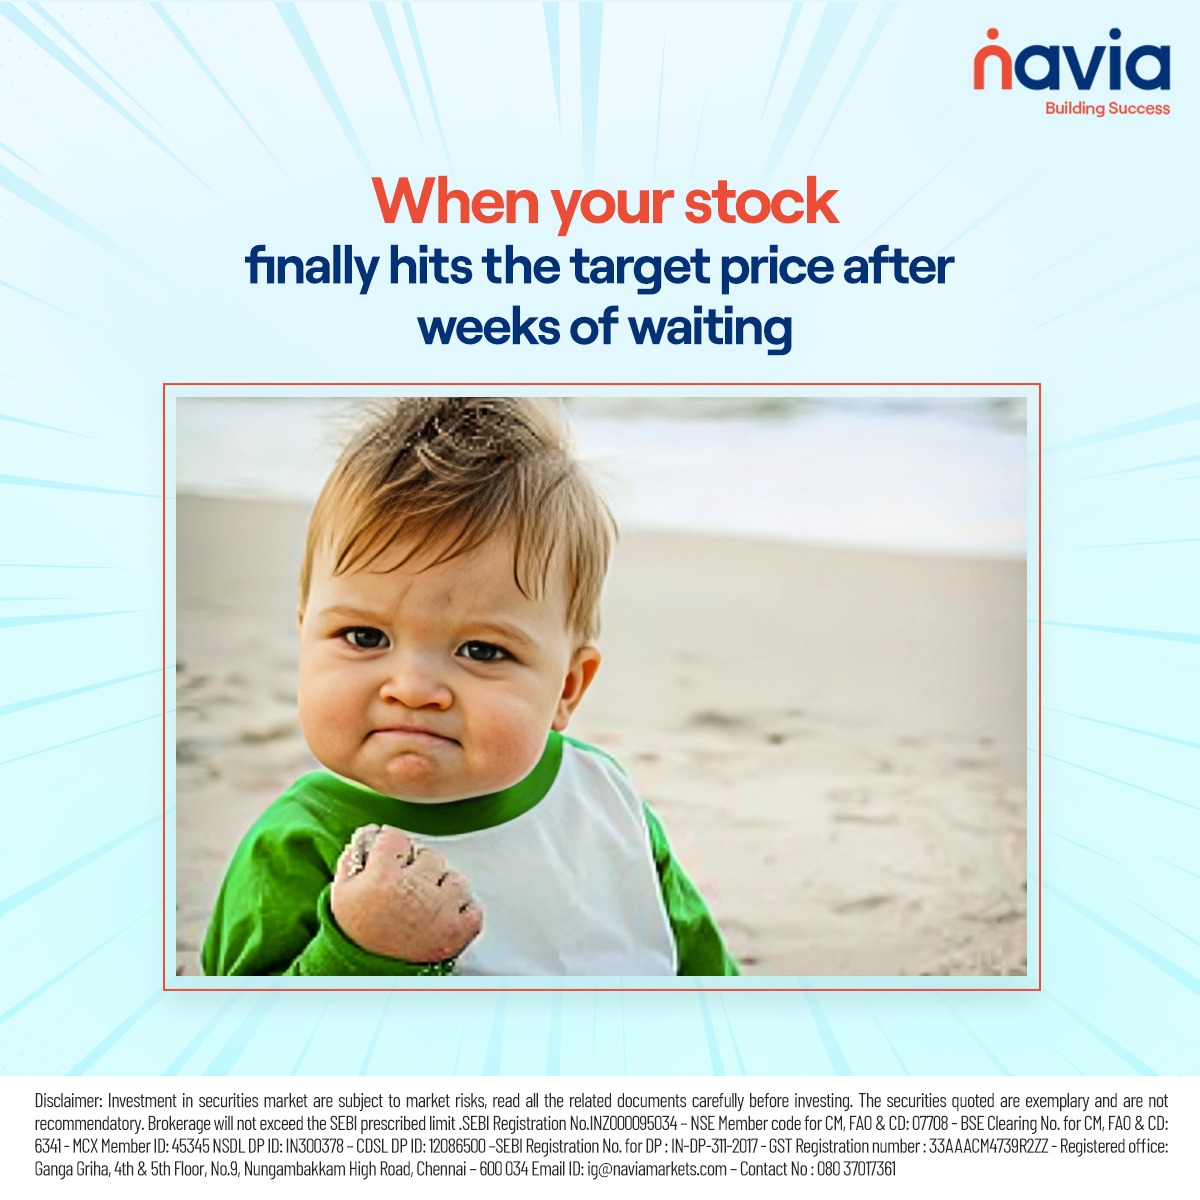 That feeling after finally seeing those numbers line up! Happens with you too? Tell us in the comments.

#Navia #TrustedTradingPartner #TradeSmart #FinancialFreedom #InvestingJourney #StockMarket #Trading #WealthCreation #TargetAchieved #StockMarketSuccess